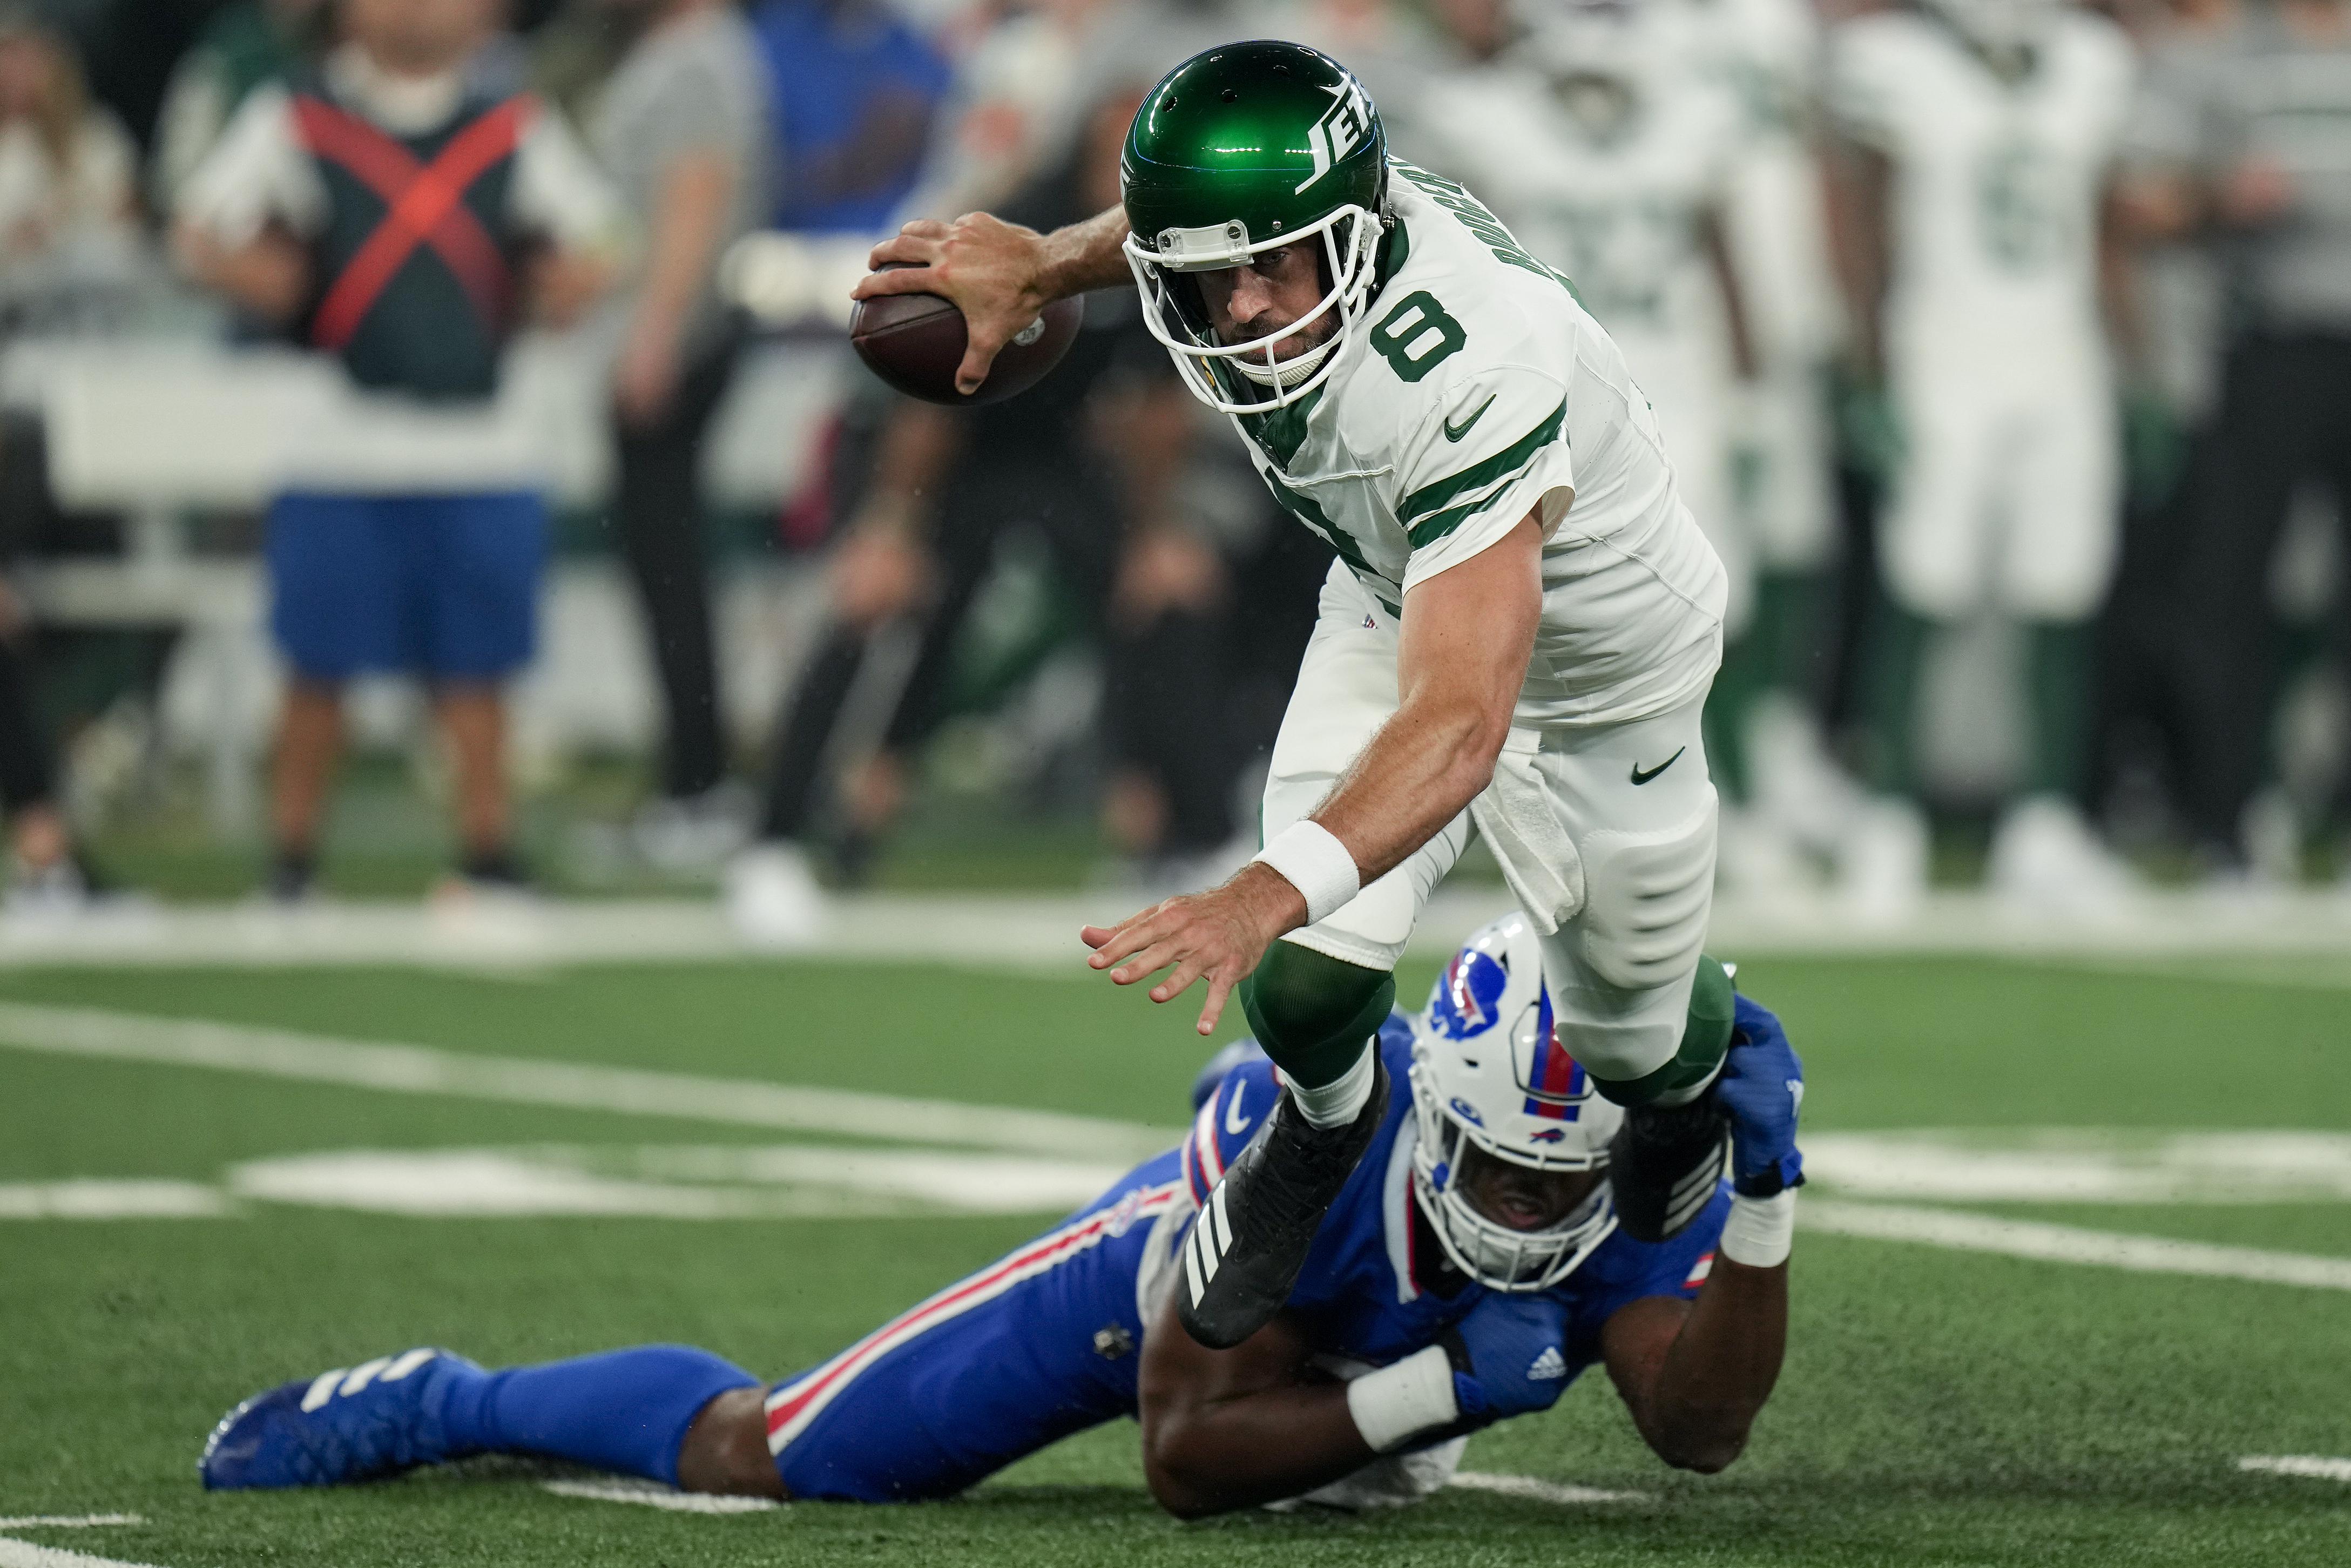 Tickets for NY Jets vs. Bills game sells out after relocation to